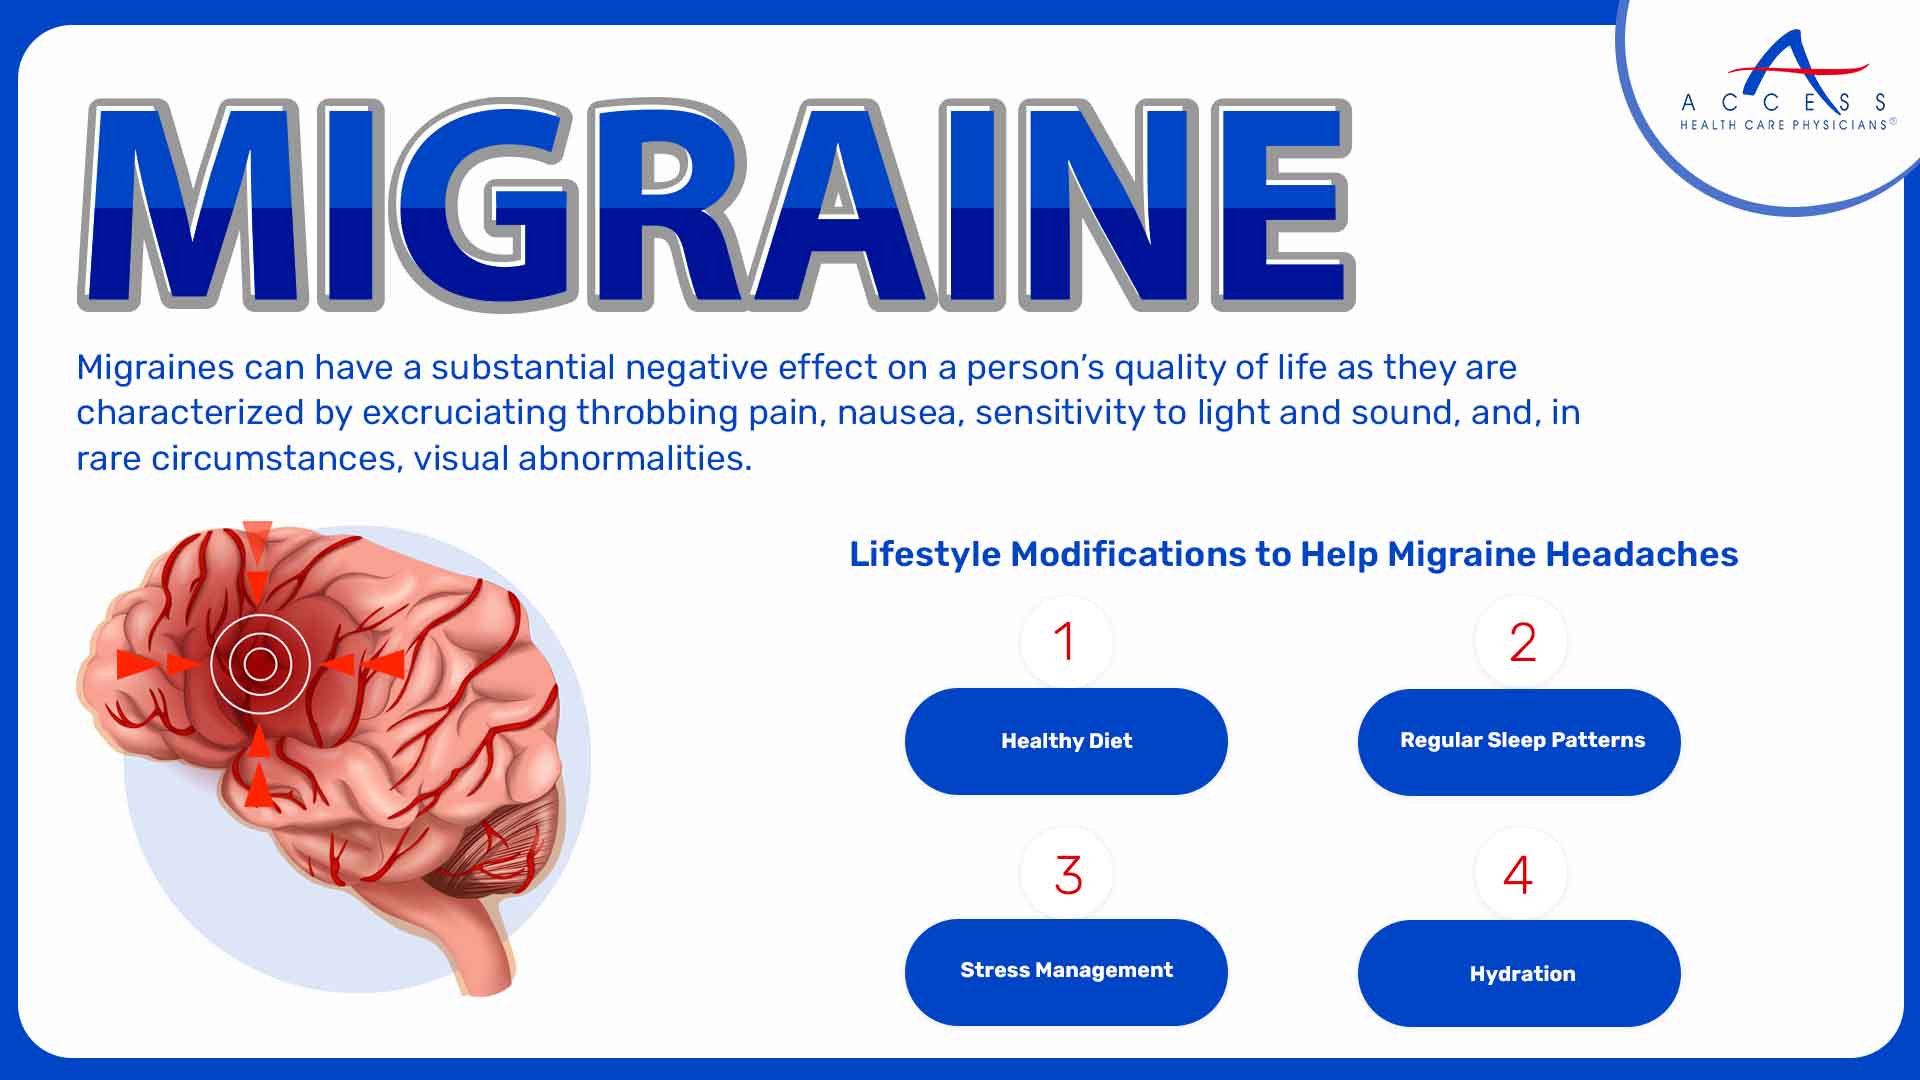 Lifestyle Modifications to Help Migraine Headaches